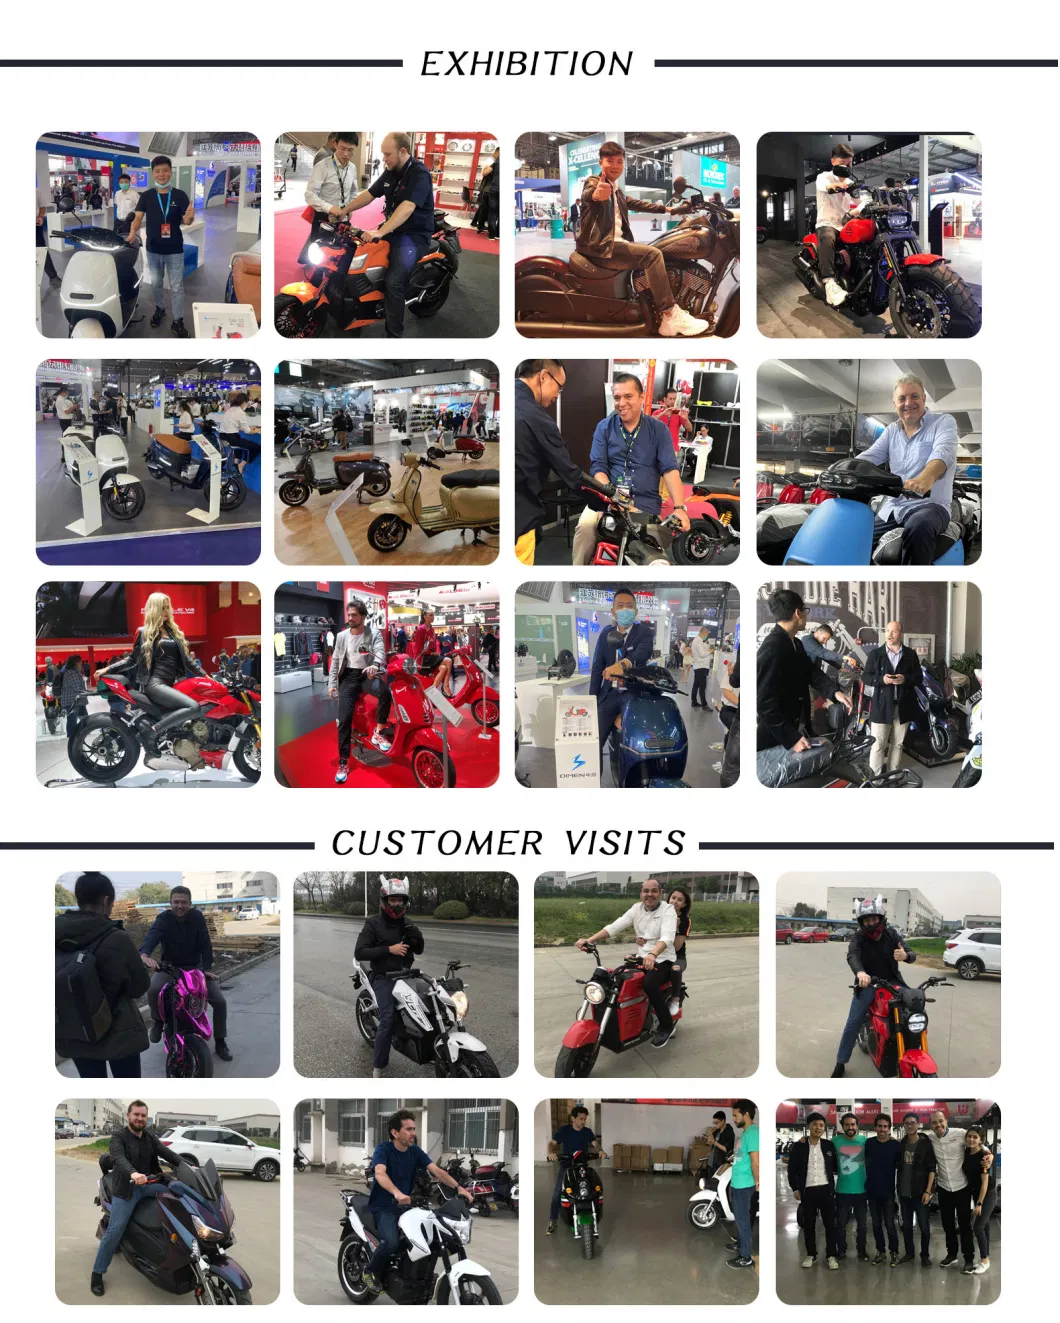 1200W Battery Electric Scooter Powerful Electric Moped for Adult Lithium Battery